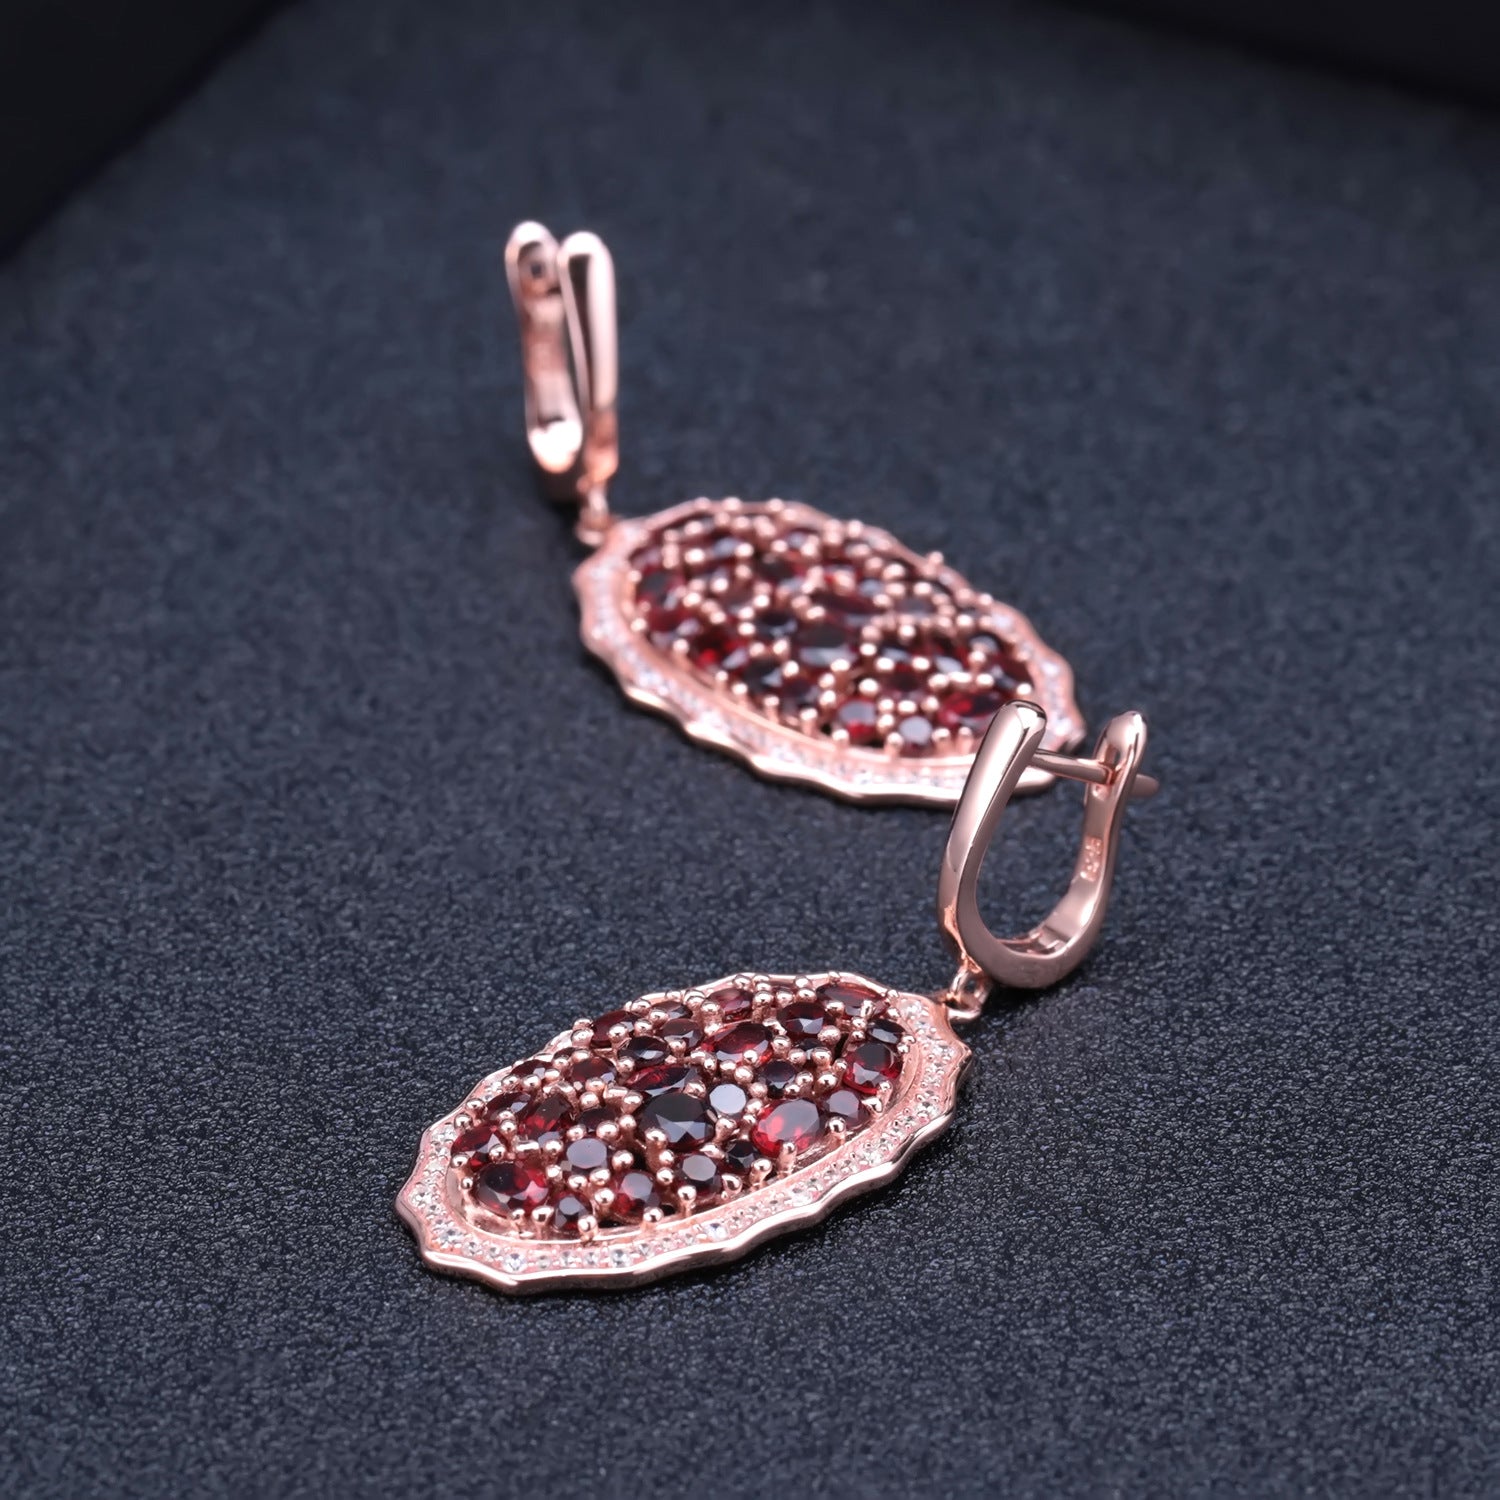 Luxury Style Group Inlaid Natural Garnet Oval Silver Drop Earrings for Women